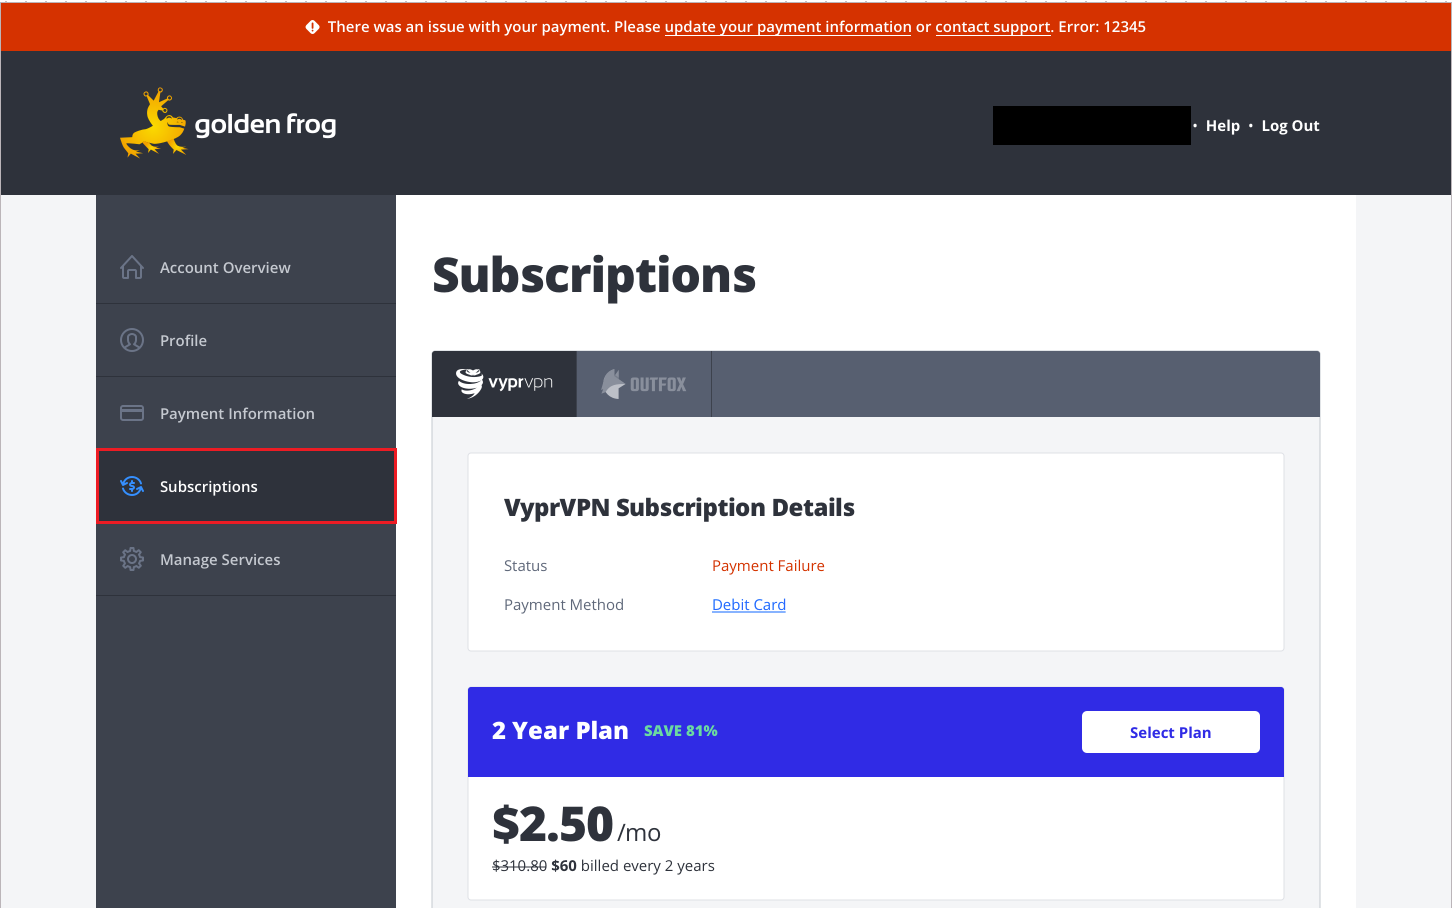 Subscriptions_-_Account_Locked_Update_Payment_Information_-_Subscriptions_selected.png